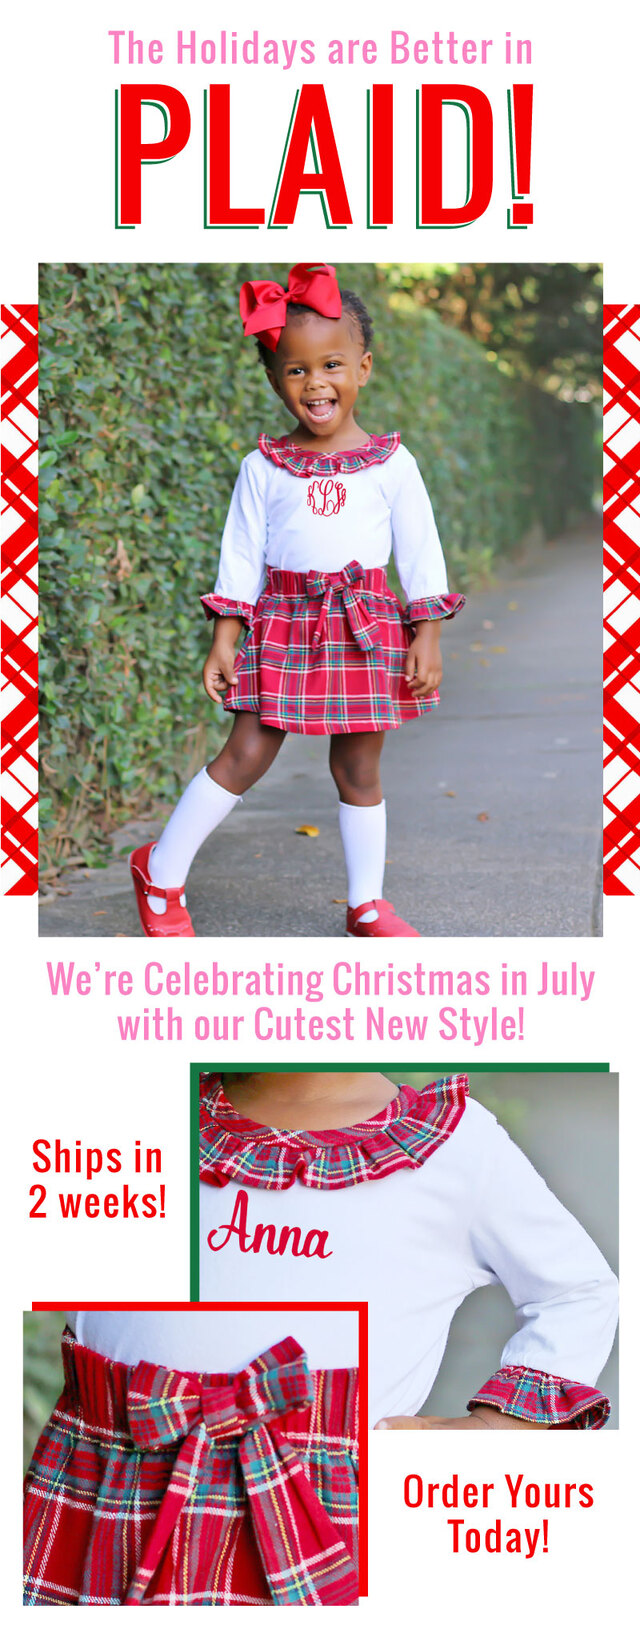 The Holidays are better in PLAID! We're celebrating Christmas in July with our cutest new style! Order NOW & Ships in 2 weeks!